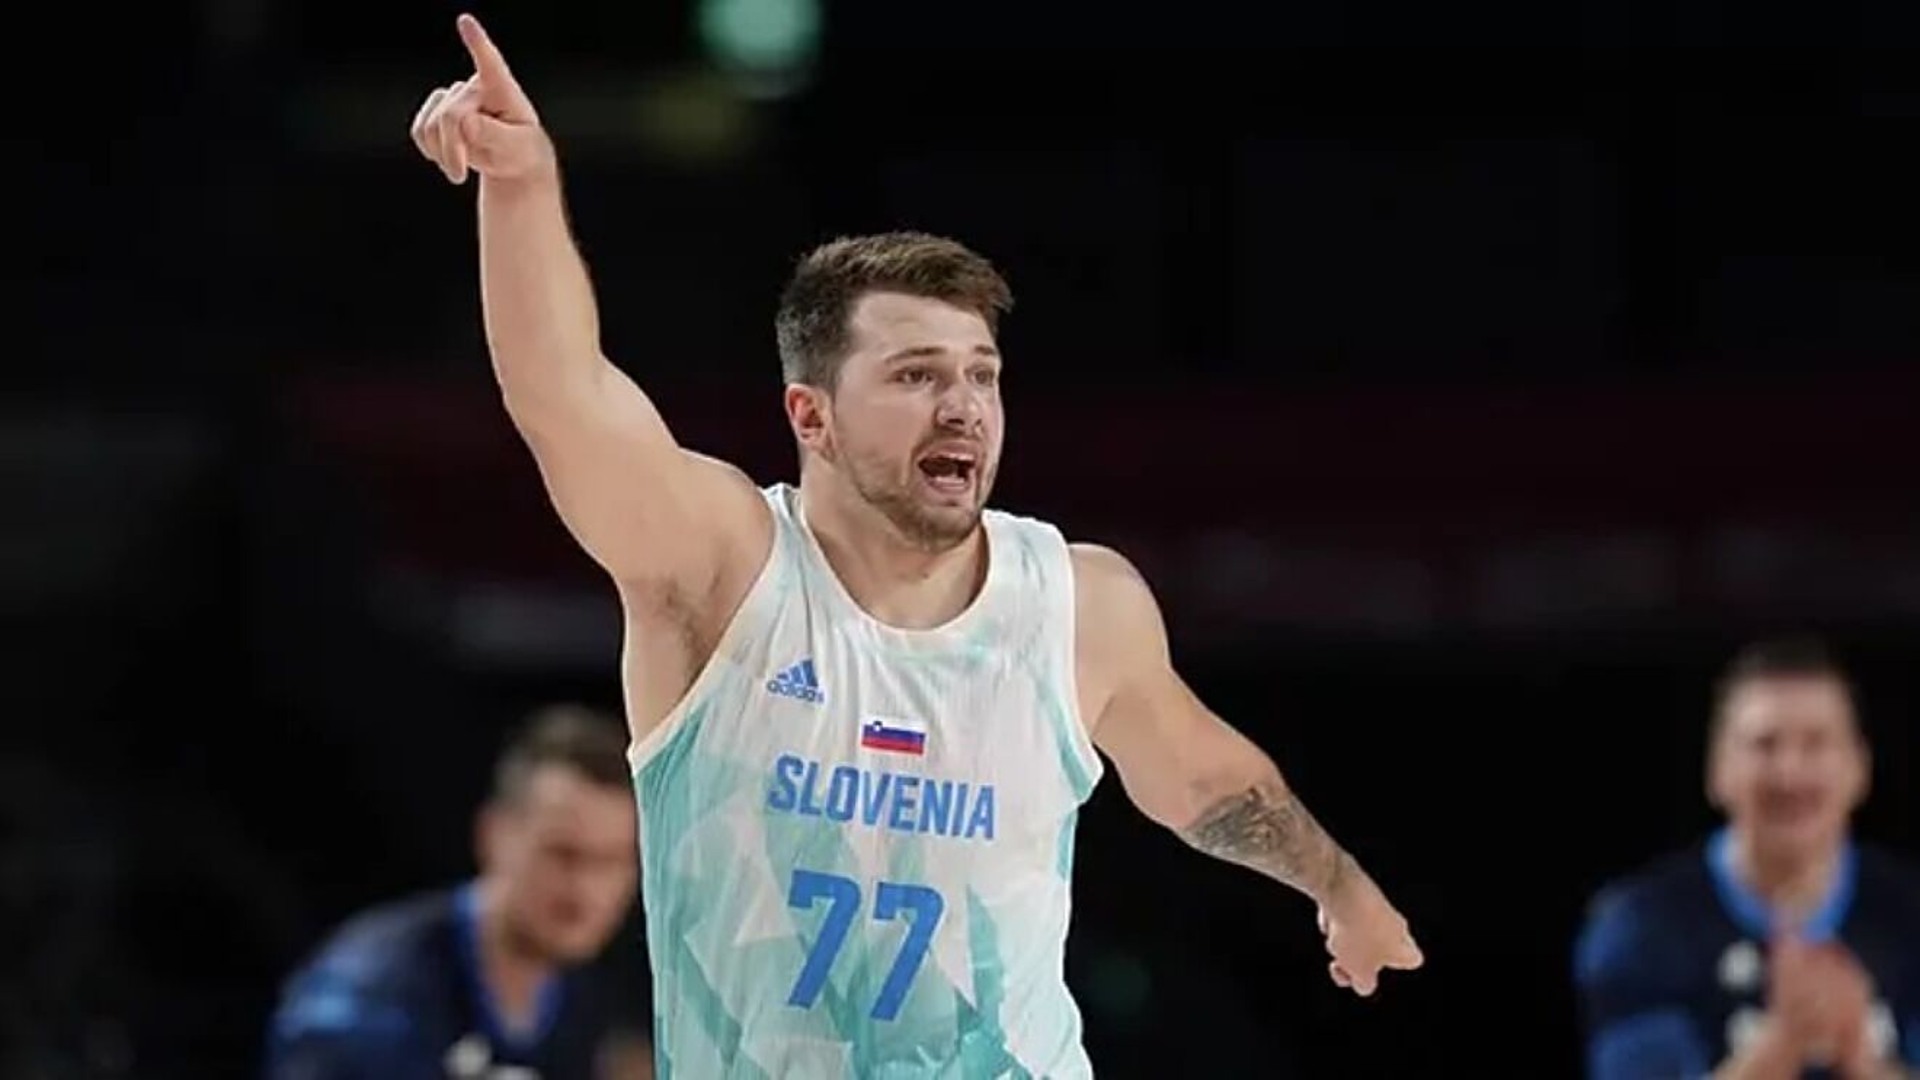 The EuroBasket 2022 quarter-finals match between Slovenia vs Poland will be held at Arena Berlin (Image credits: Twitter)